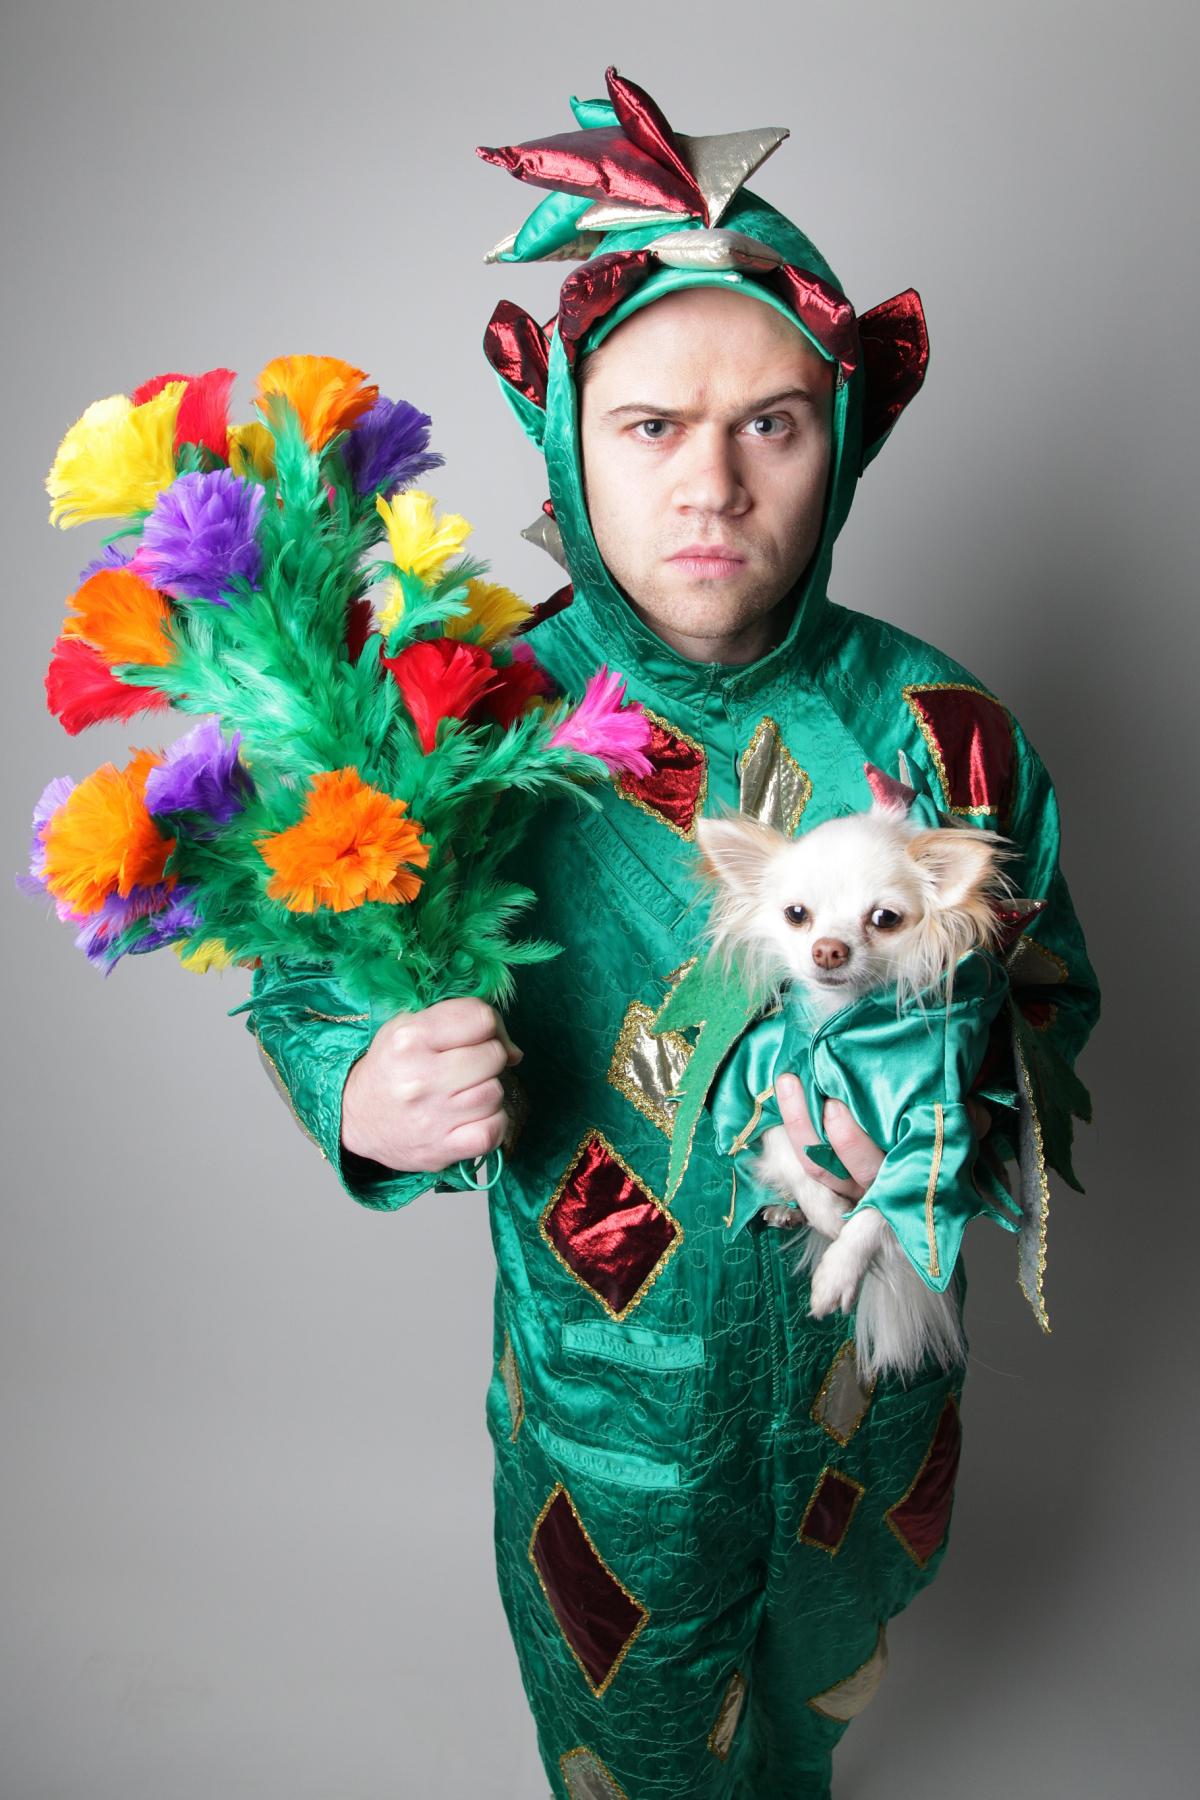 The Untold Story About Jade Simone, Piff The Magic Dragon's Wife, That We Know